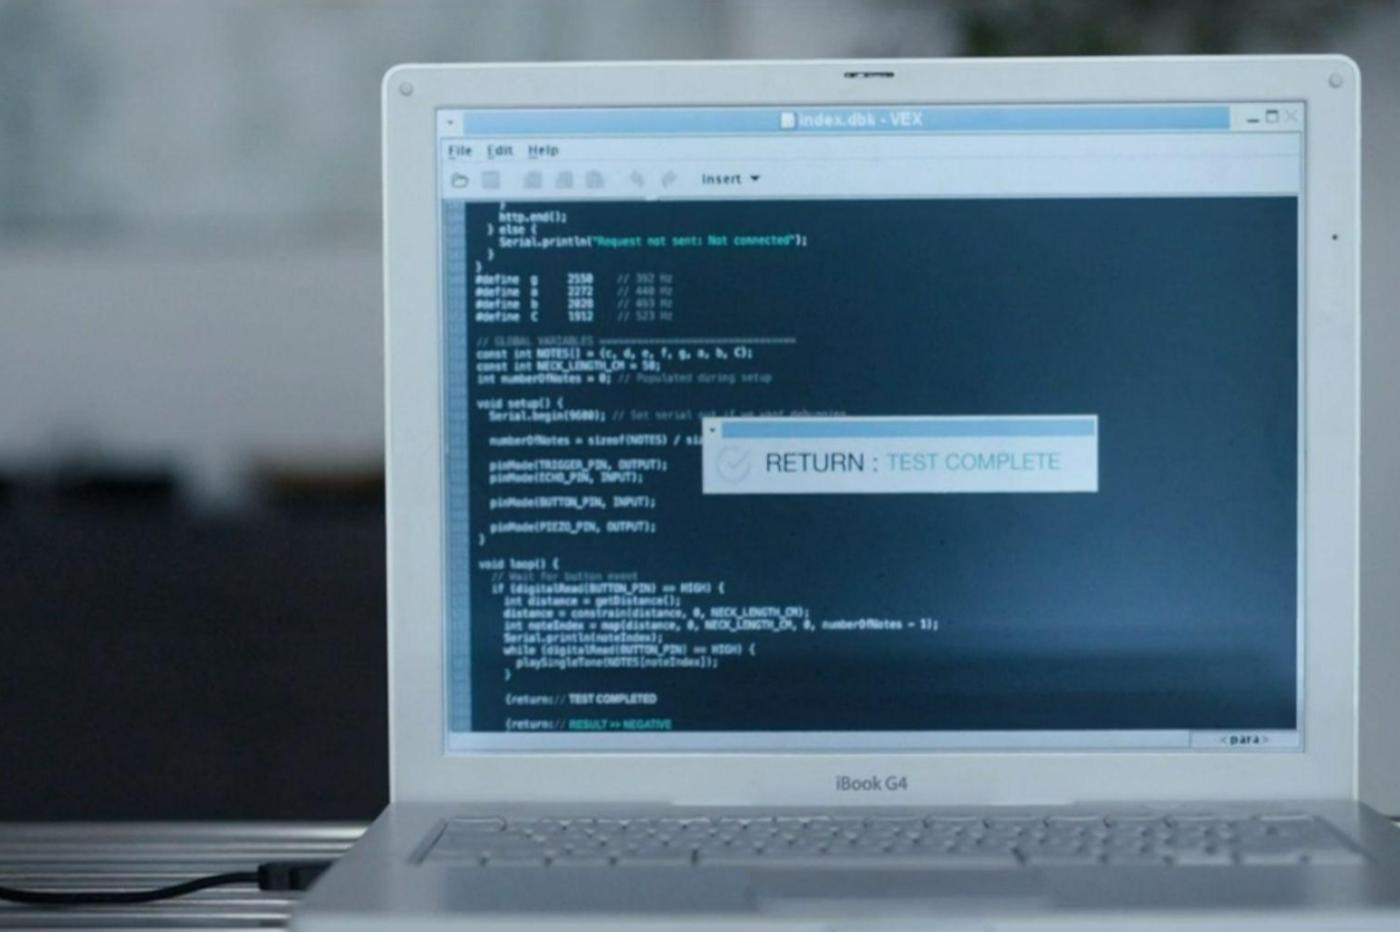 Screenshot from The Dropout series that shows the screen showing the falsified result of Theranos' first public test